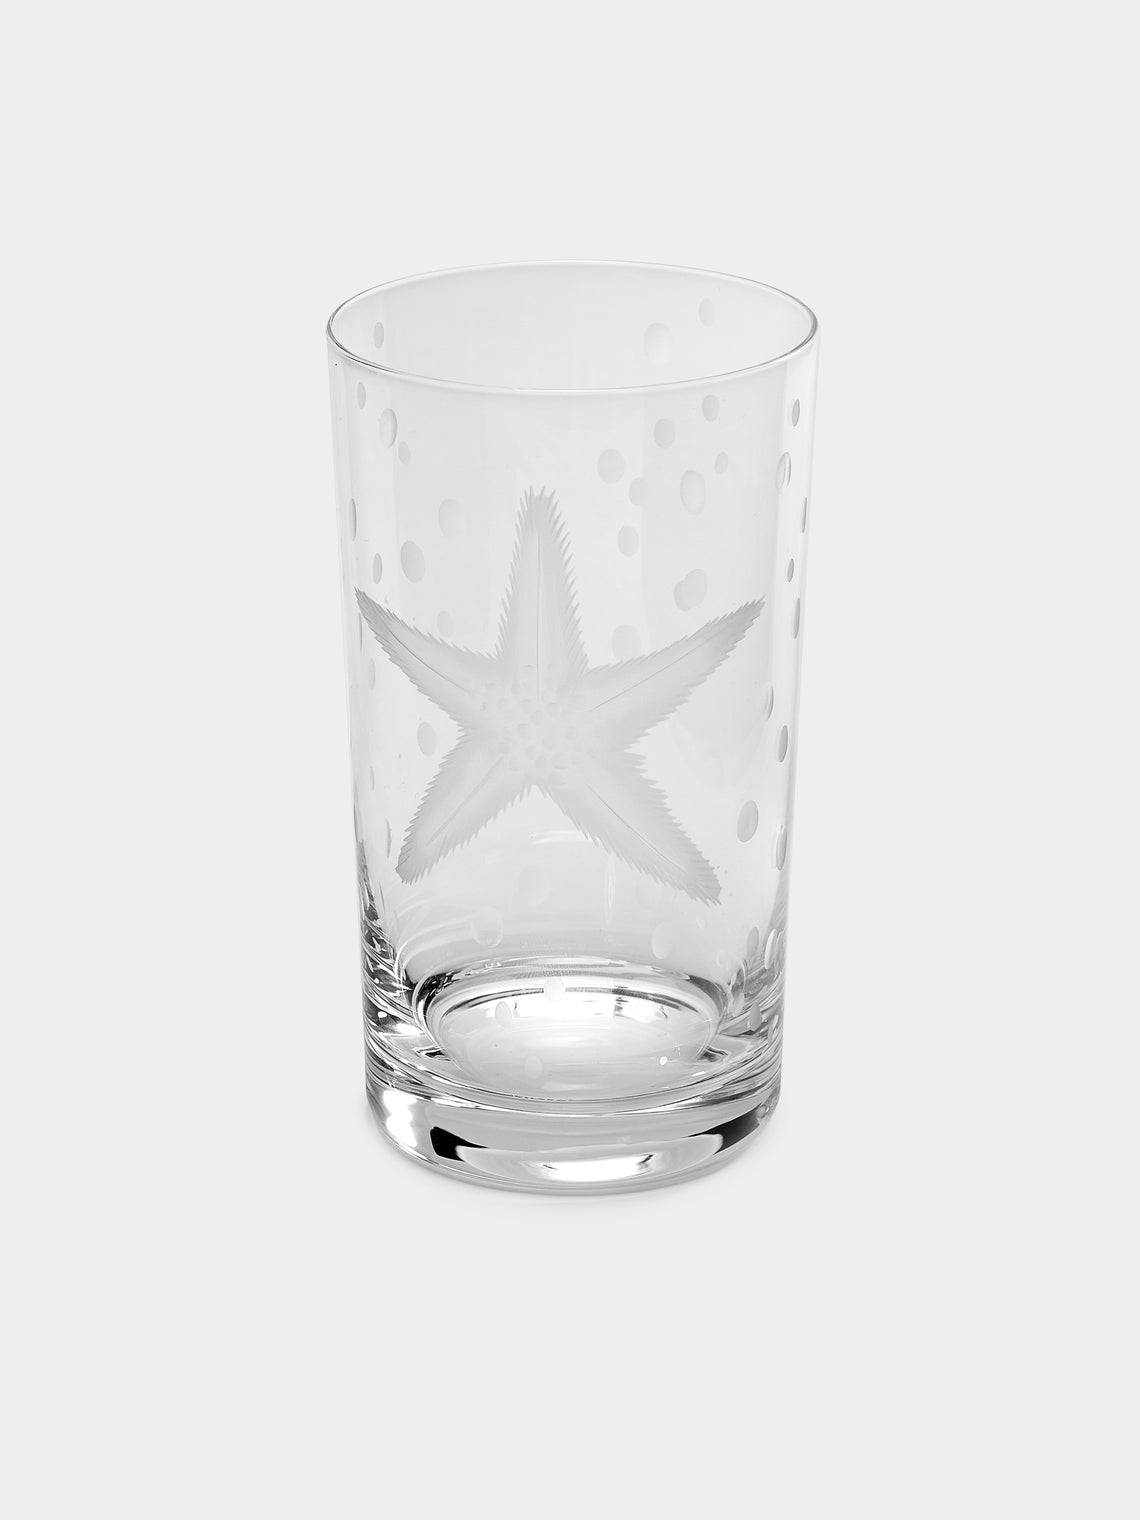 Artel - Frutti di Mare Hand-Engraved Crystal Tall Tumblers (Set of 6) -  - ABASK